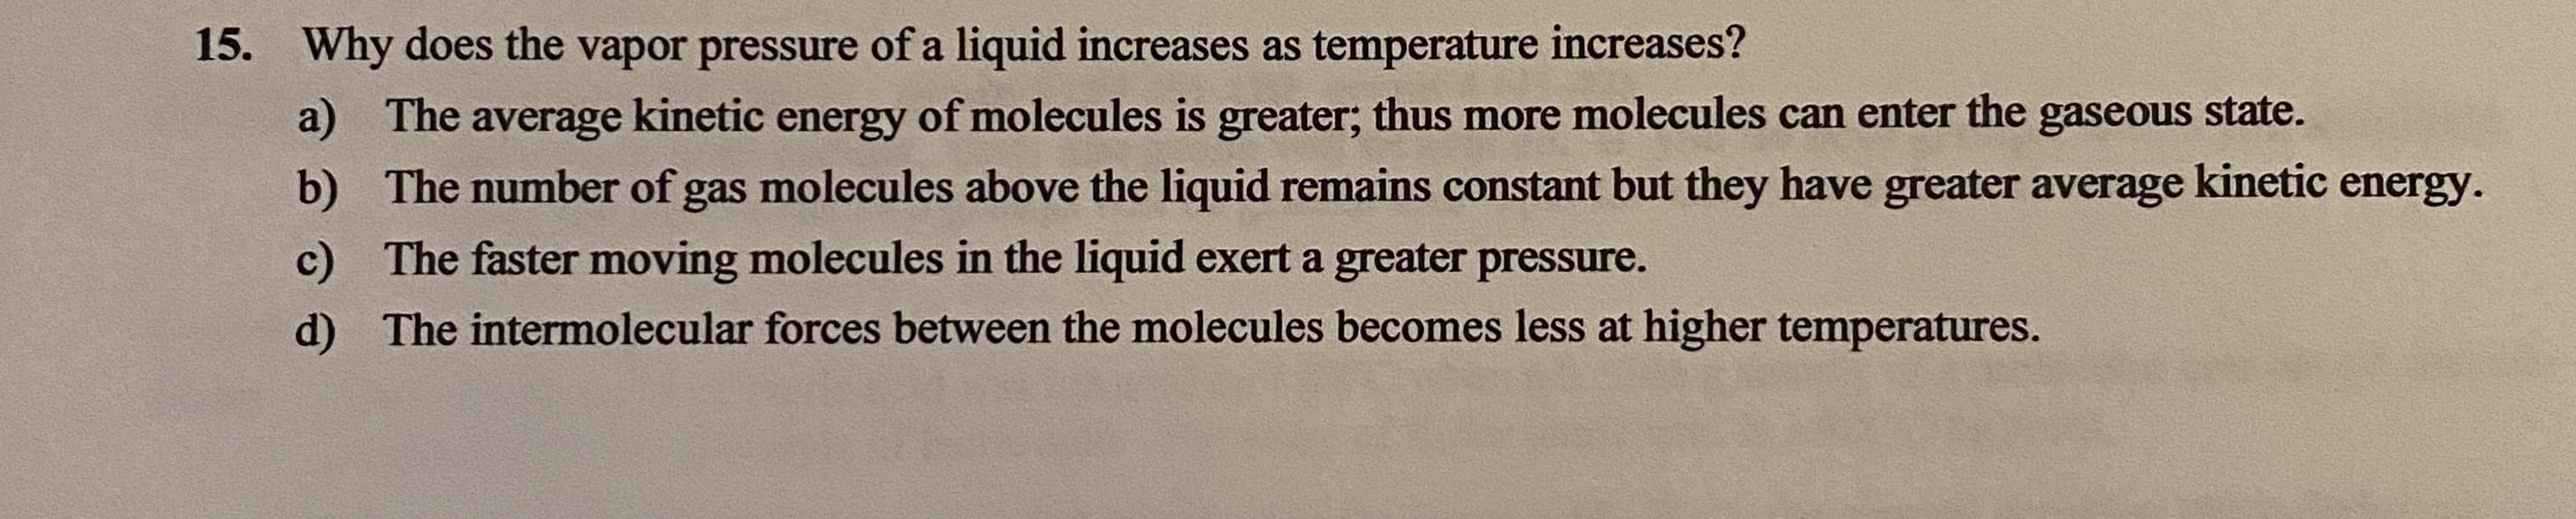 Why does the vapor pressure of a liquid increases as temperature increases?
a) The
average kinetic
energy
of molecules is greater; thus more molecules can enter the gaseous state.
b) The number of gas molecules above the liquid remains constant but they have greater average kinetic
energy.
c) The faster moving molecules in the liquid exert a greater pressure.
d) The intermolecular forces between the molecules becomes less at higher temperatures.
